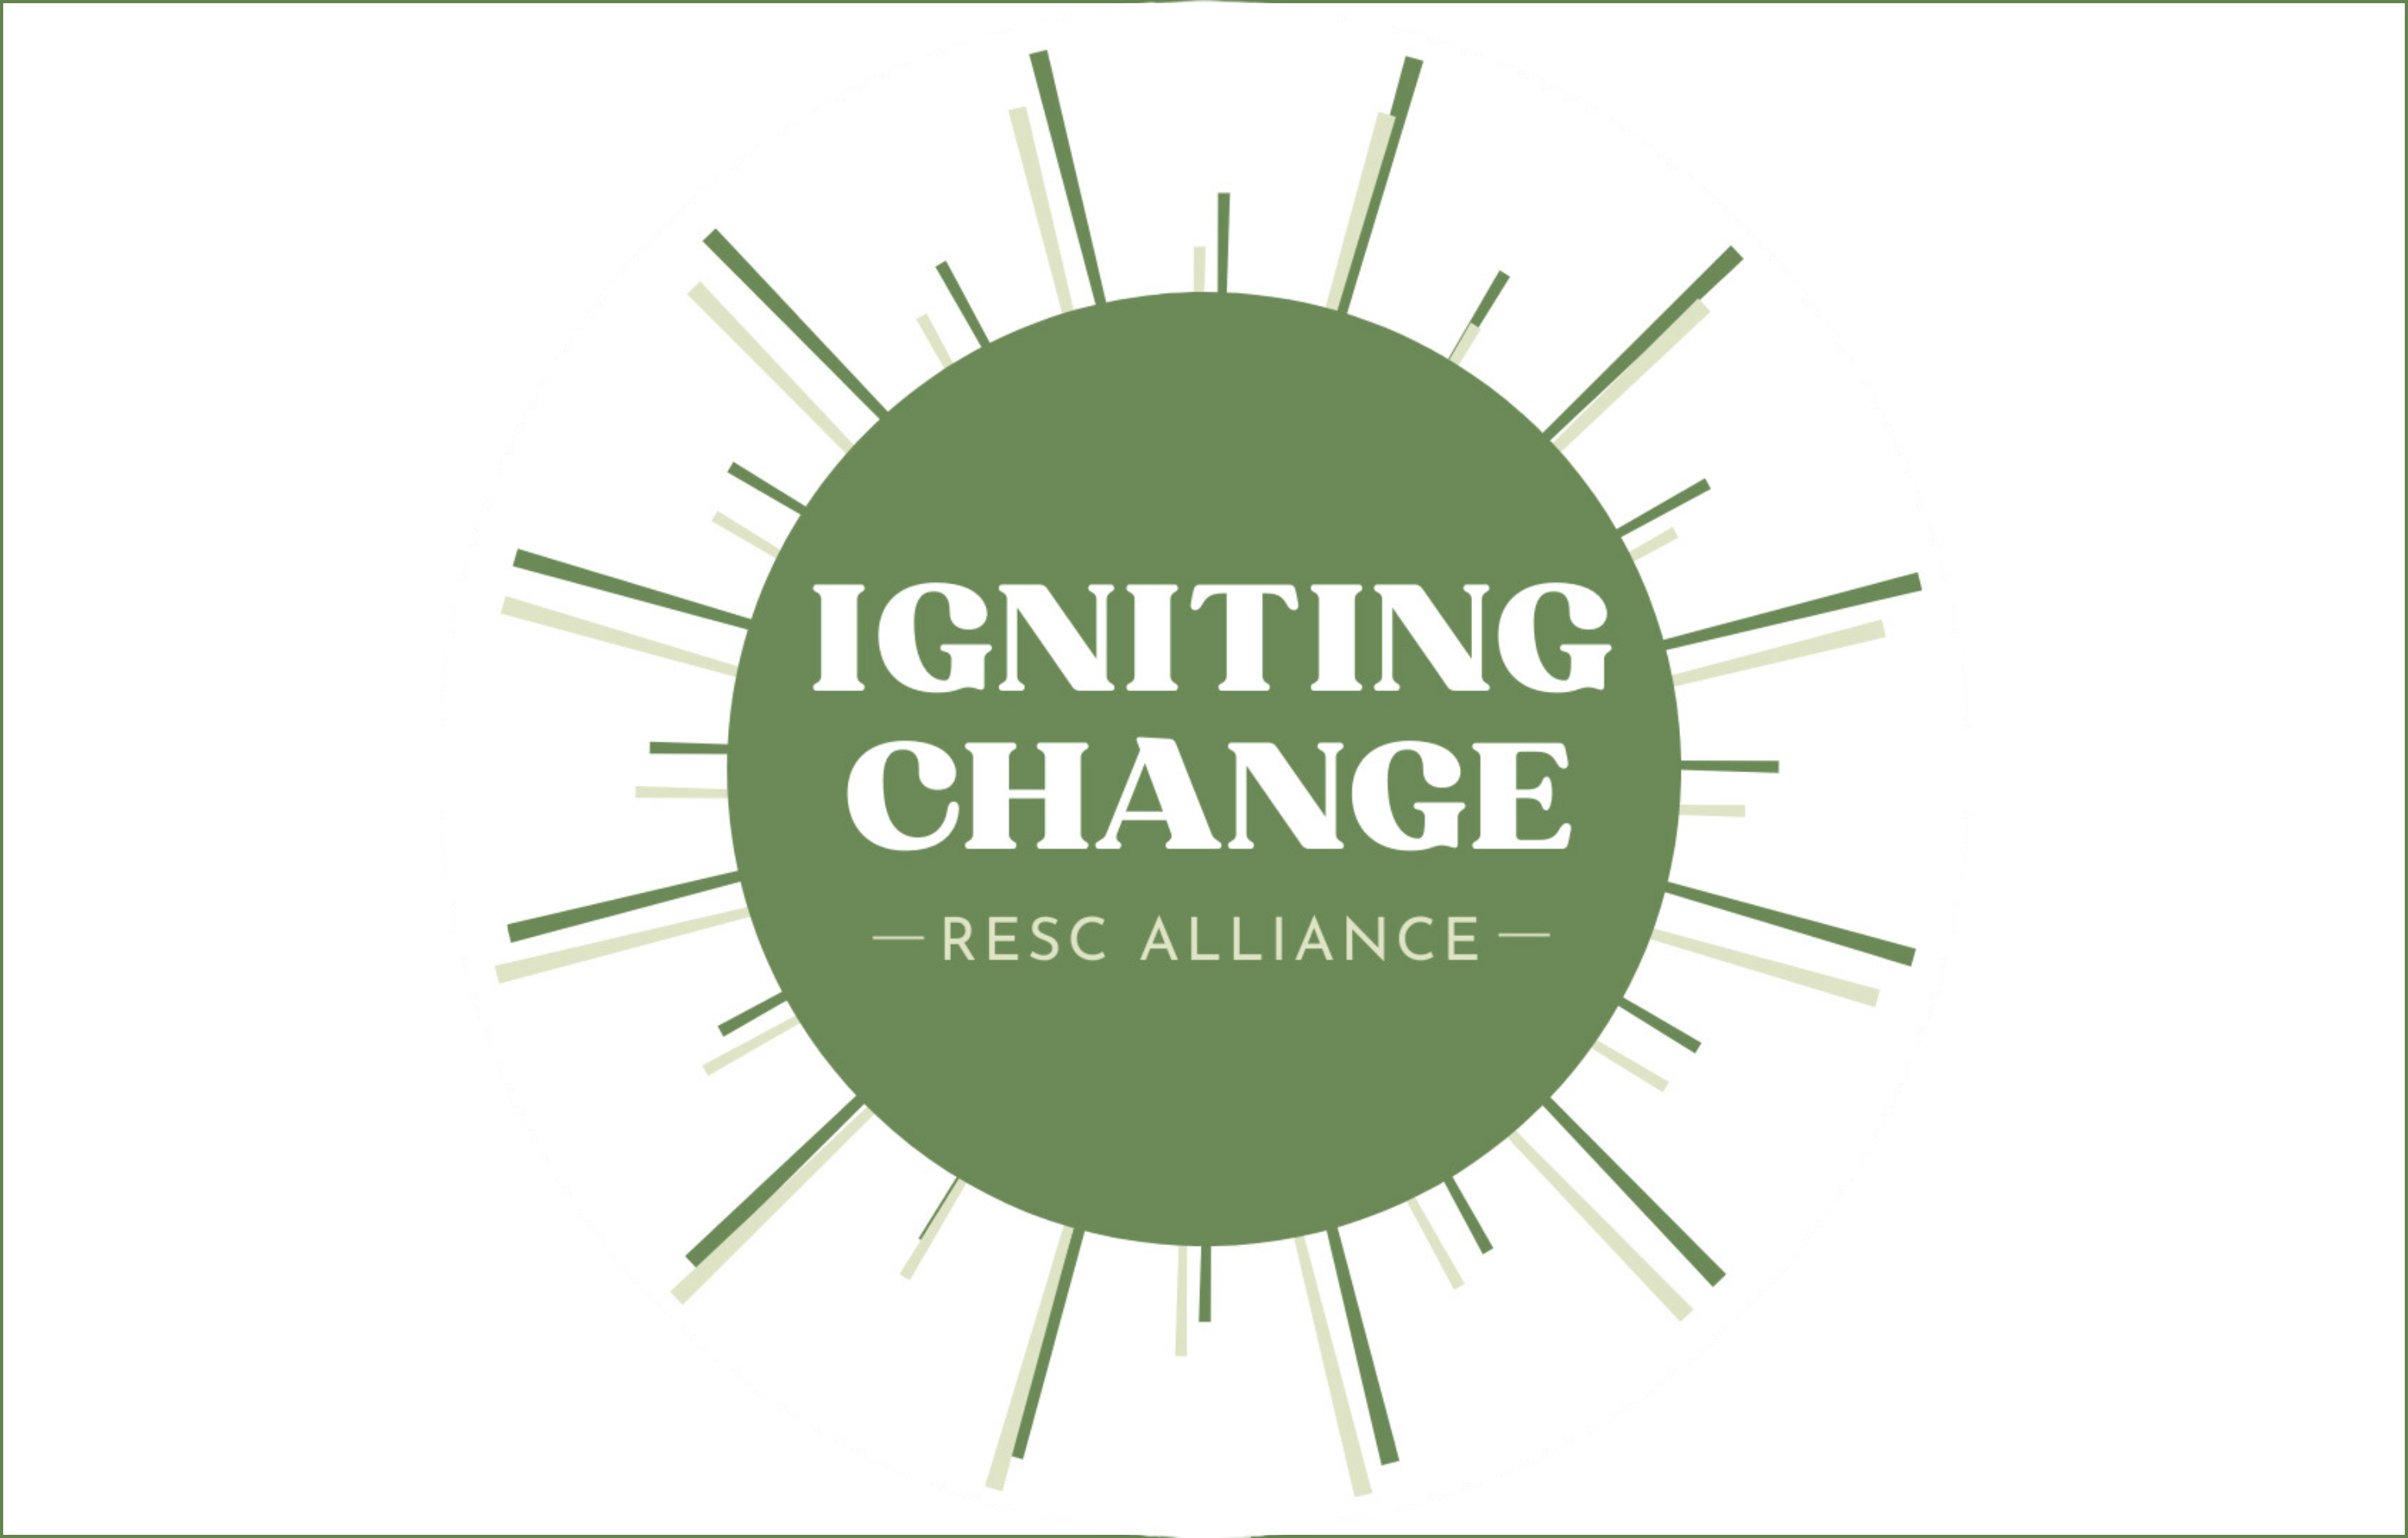 Find out more information about the RESC Alliance Igniting Change initiative.